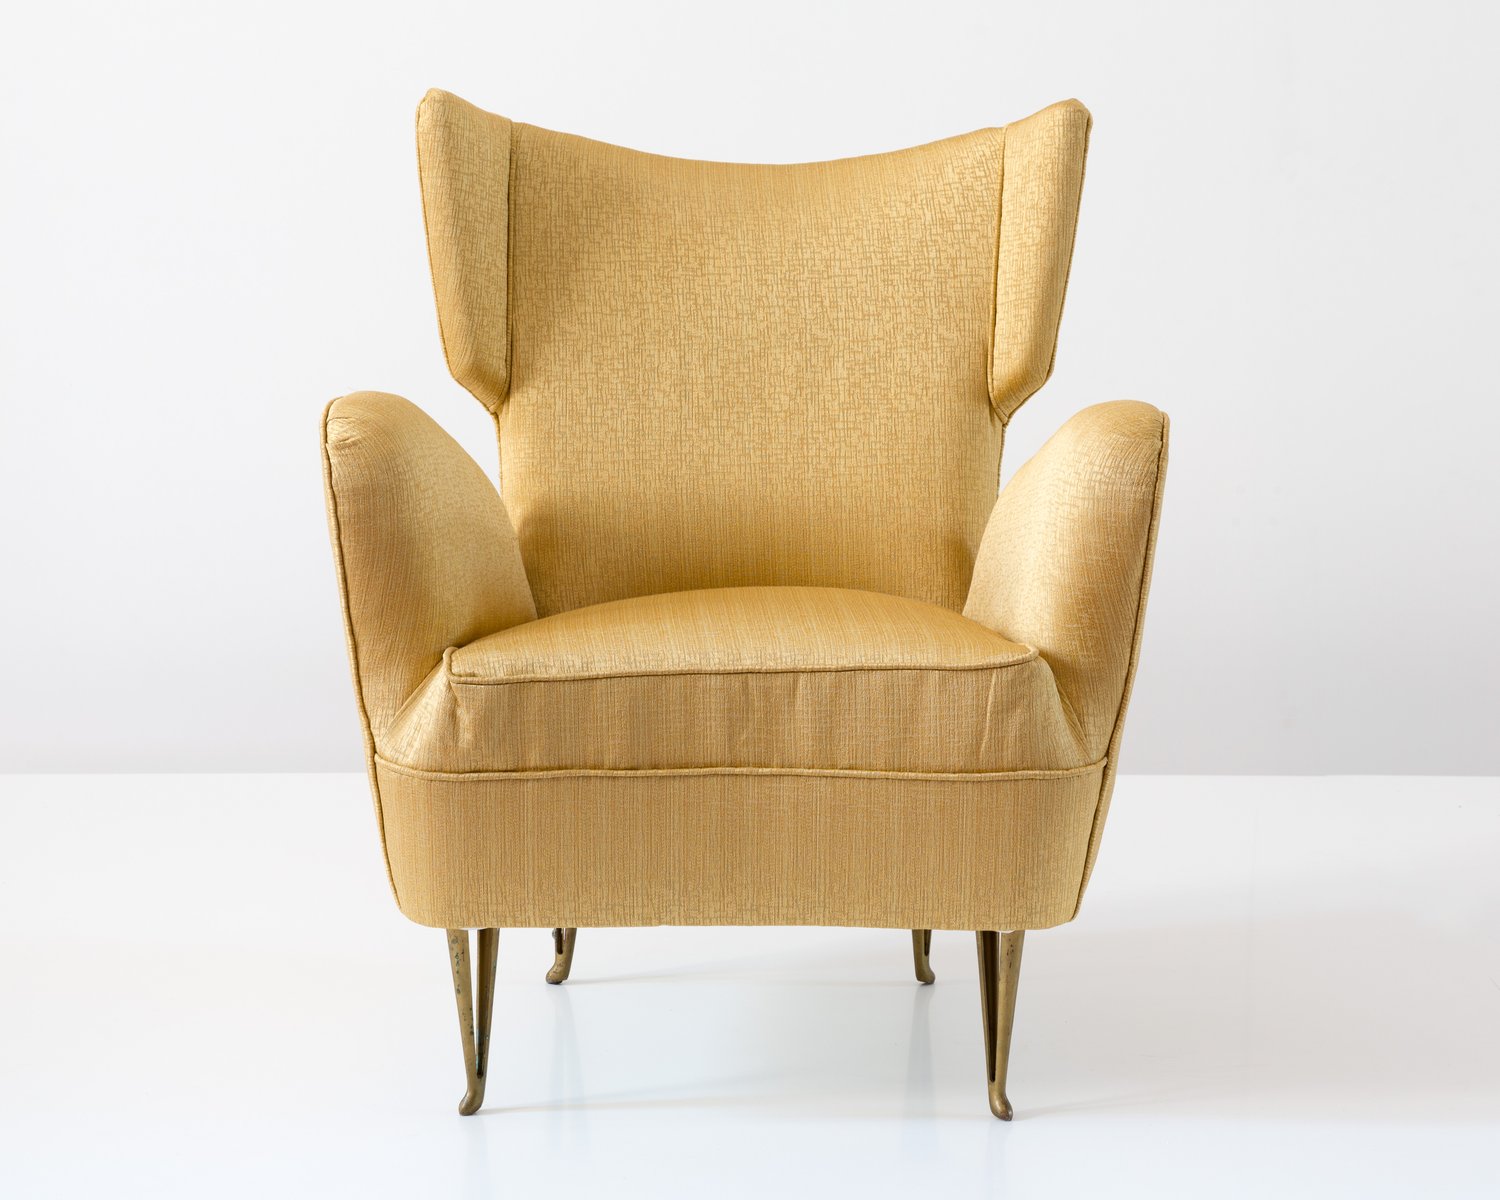 Yellow Armchair from Isa Bergamo, 1950s for sale at Pamono